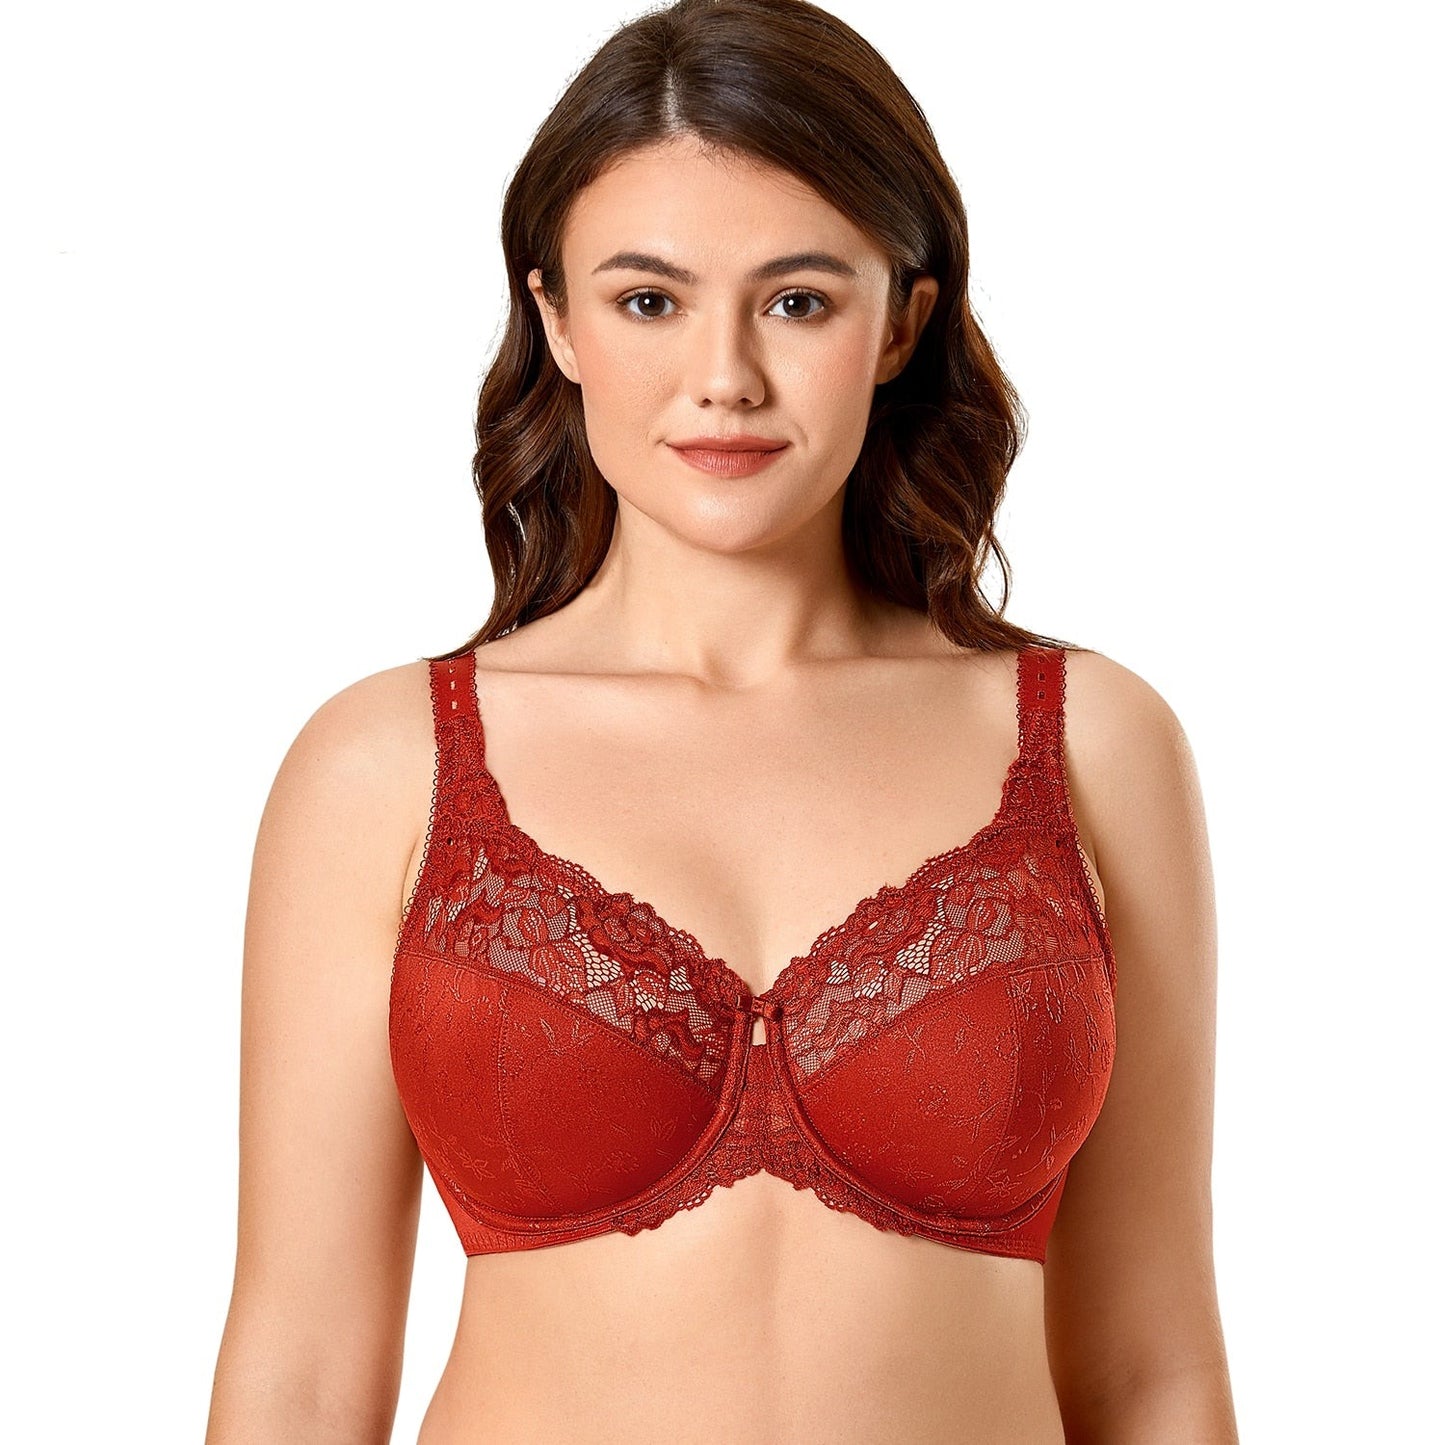 Plus size underwired non-padded lace bras (Size 34/75 - 44/100, D - H) –  SSHK Shop by SS Online Trading Limited